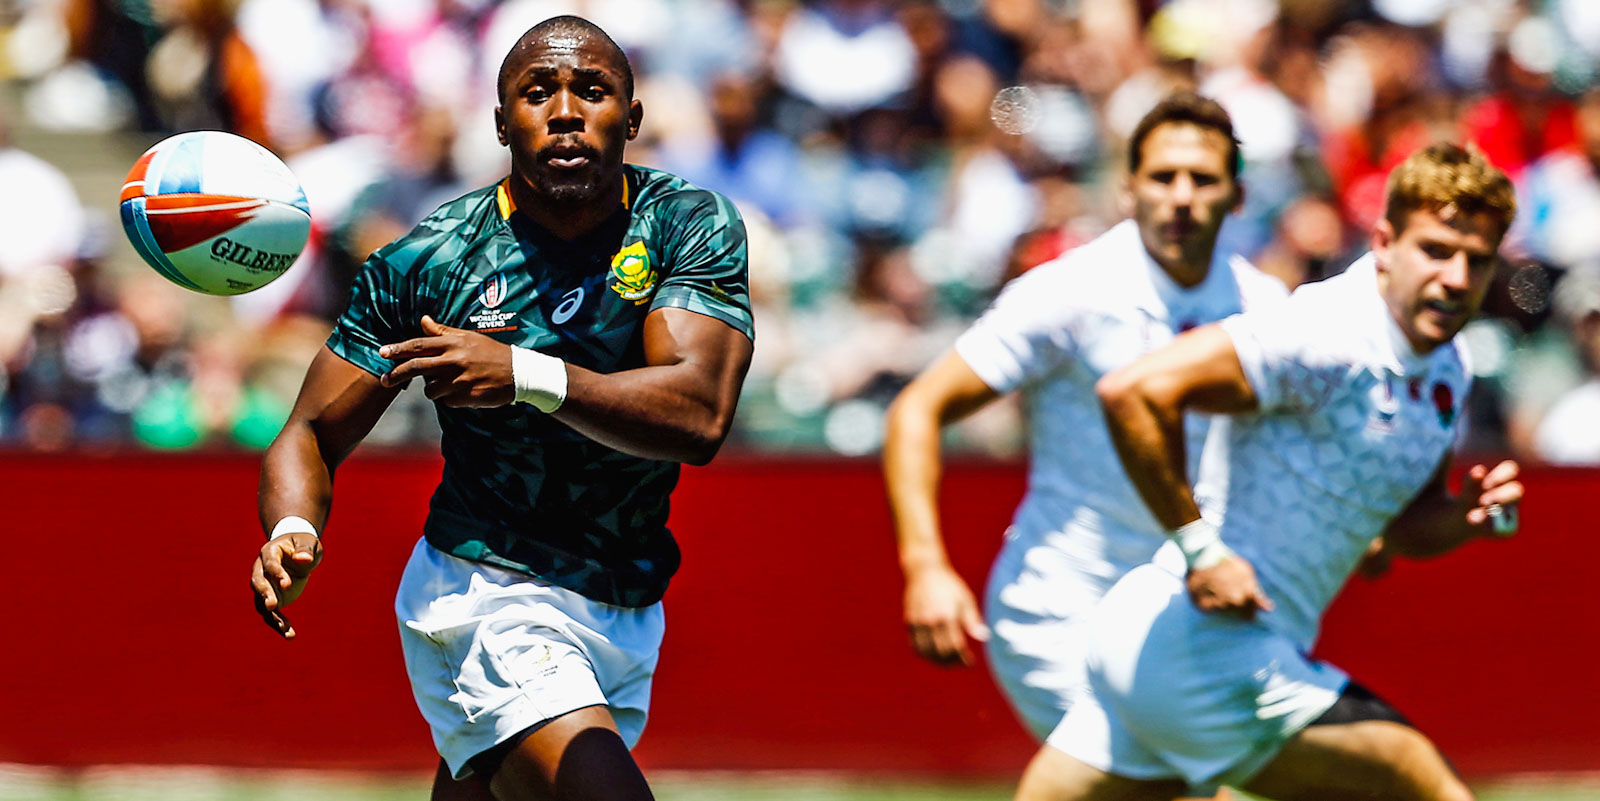 Siviwe Soyizwapi in action at the 2018 Rugby World Cup Sevens in San Francisco.